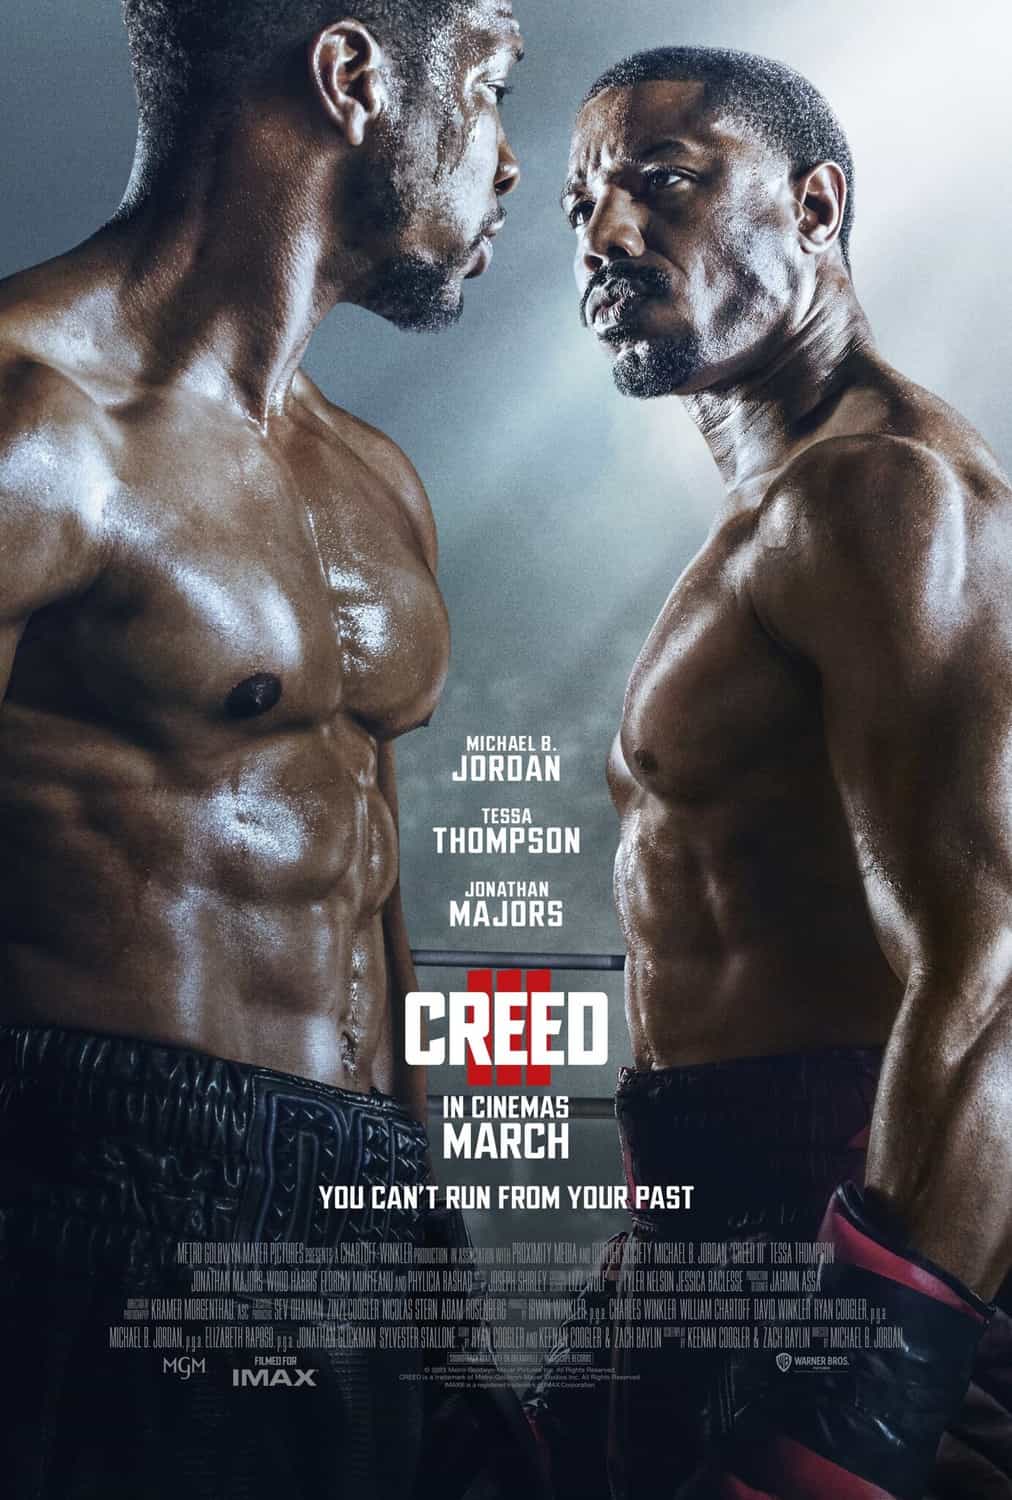 UK Box Office Weekend Report 3rd - 5th March 2023:  Creed III tops the UK box office with a £5 Million debut weekend